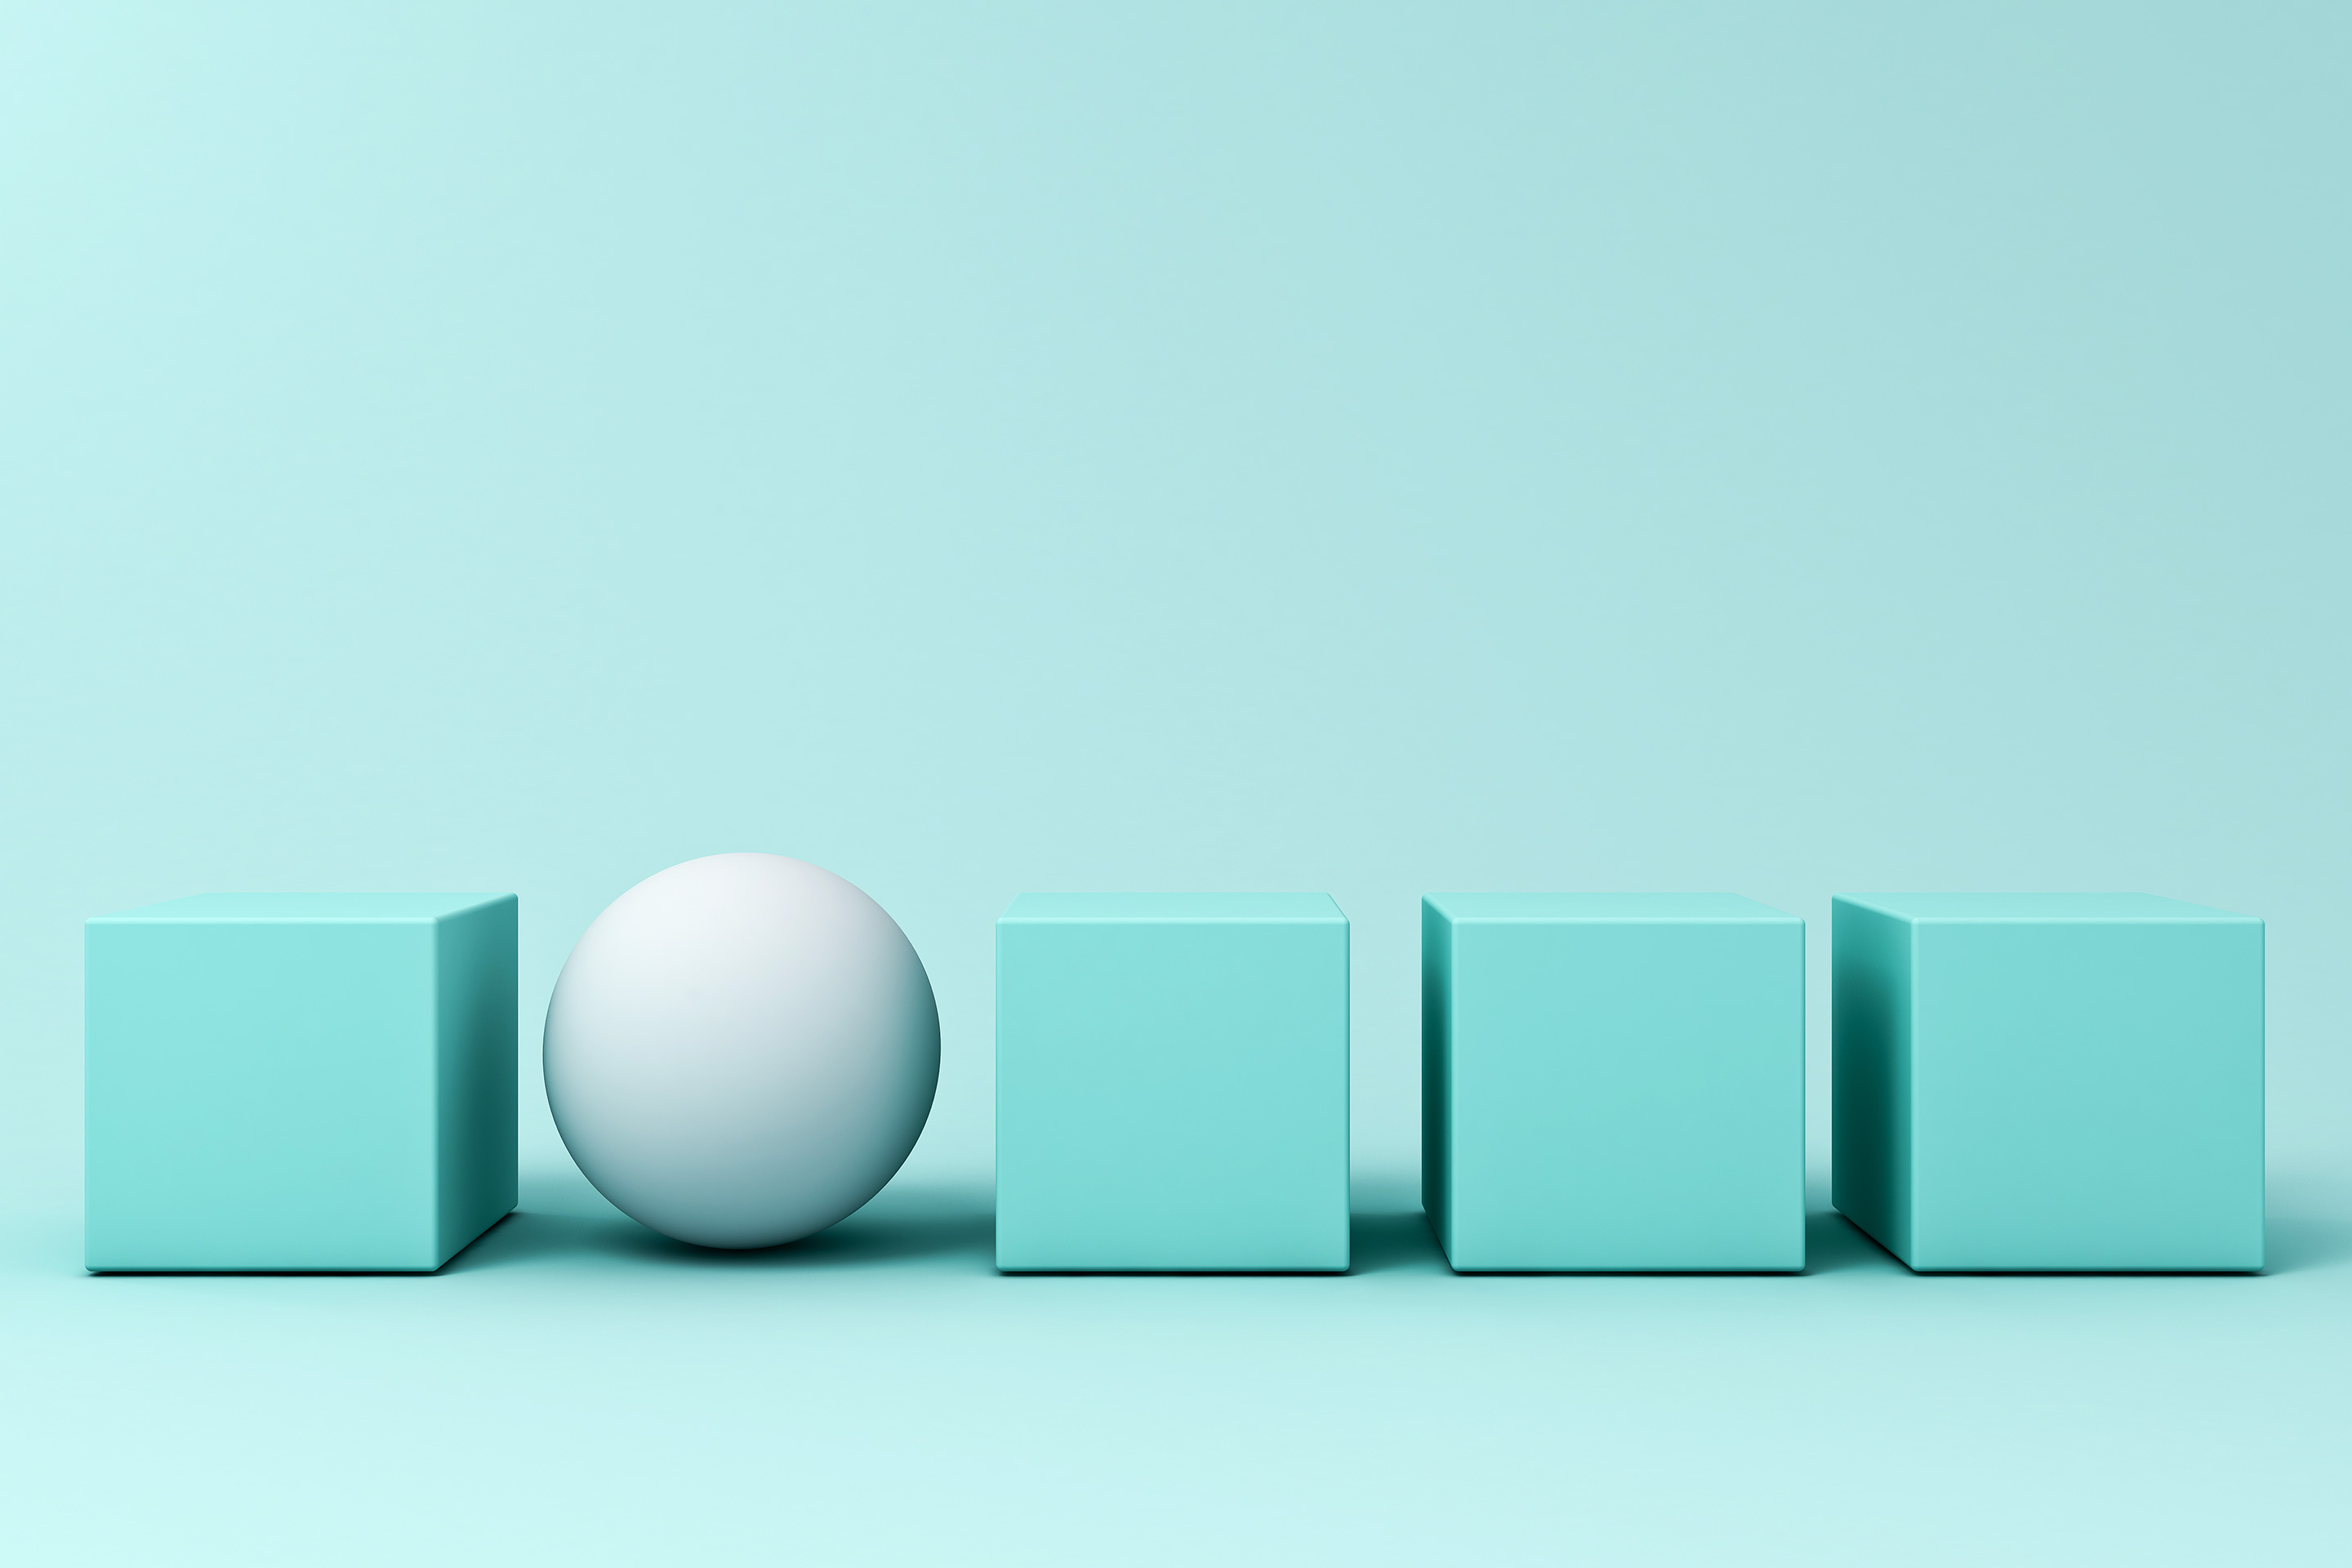 A white sphere sits among a row of blue boxes, representing customization.